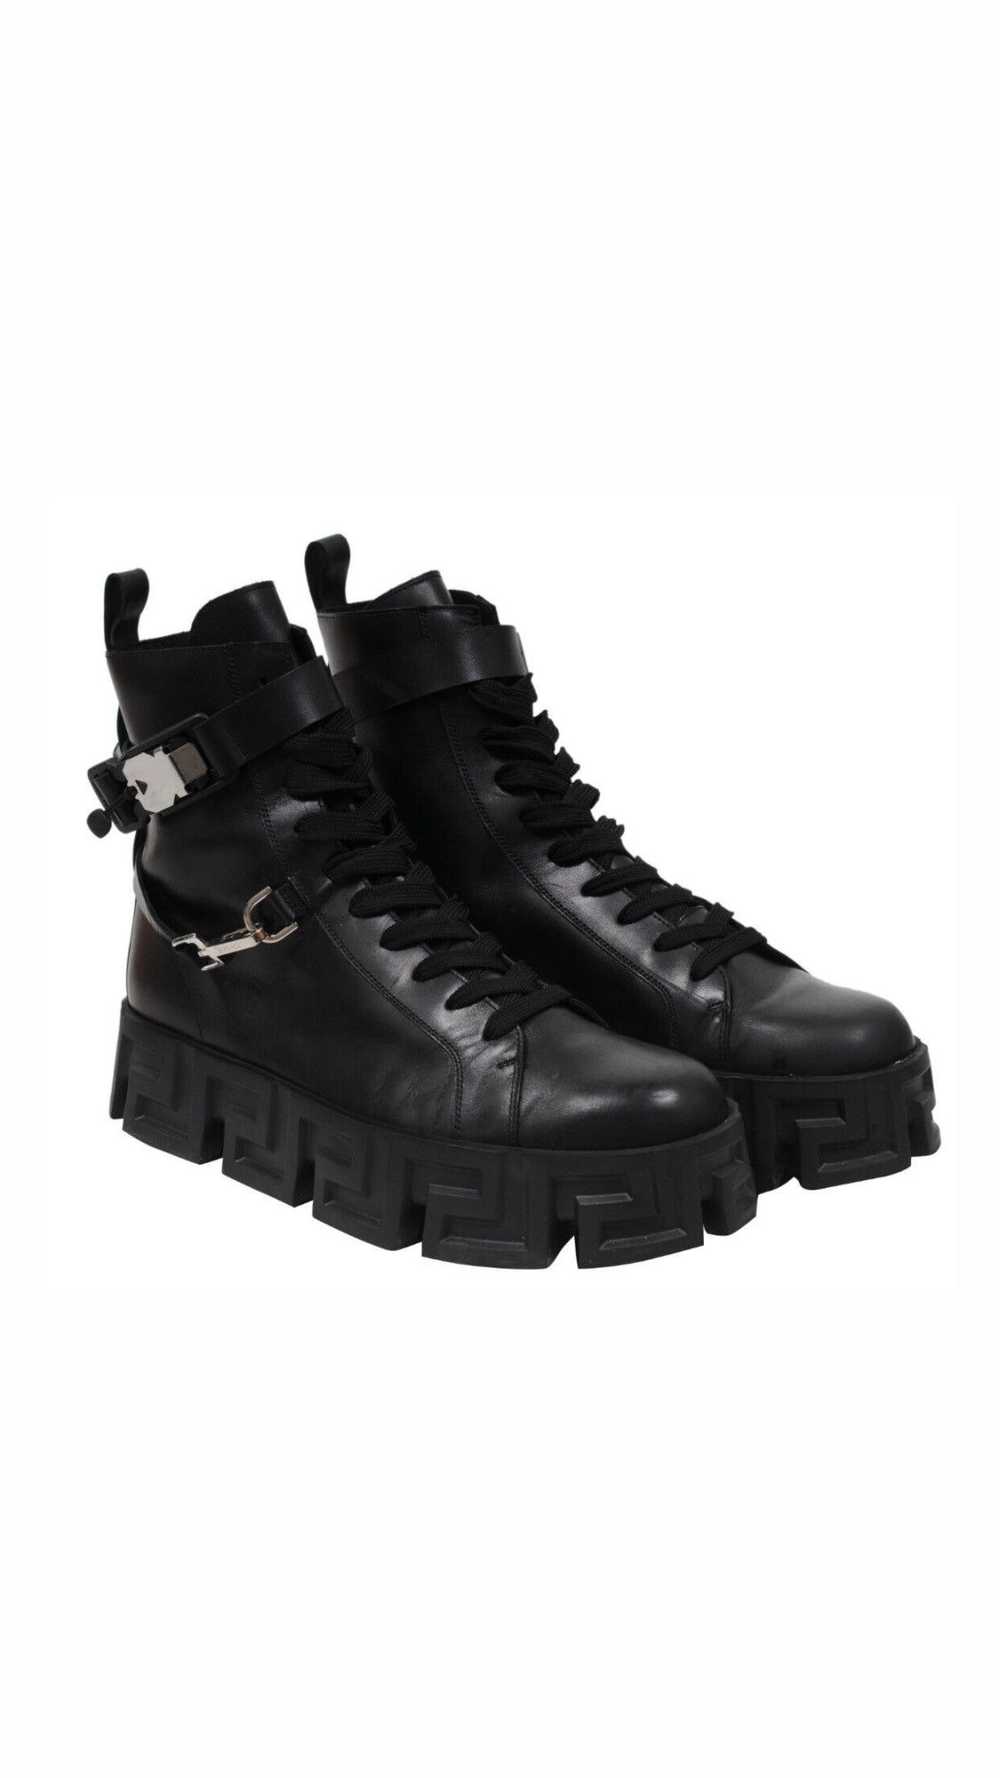 Versace Greca Labryinth Black Leather Chunky Boots - image 1